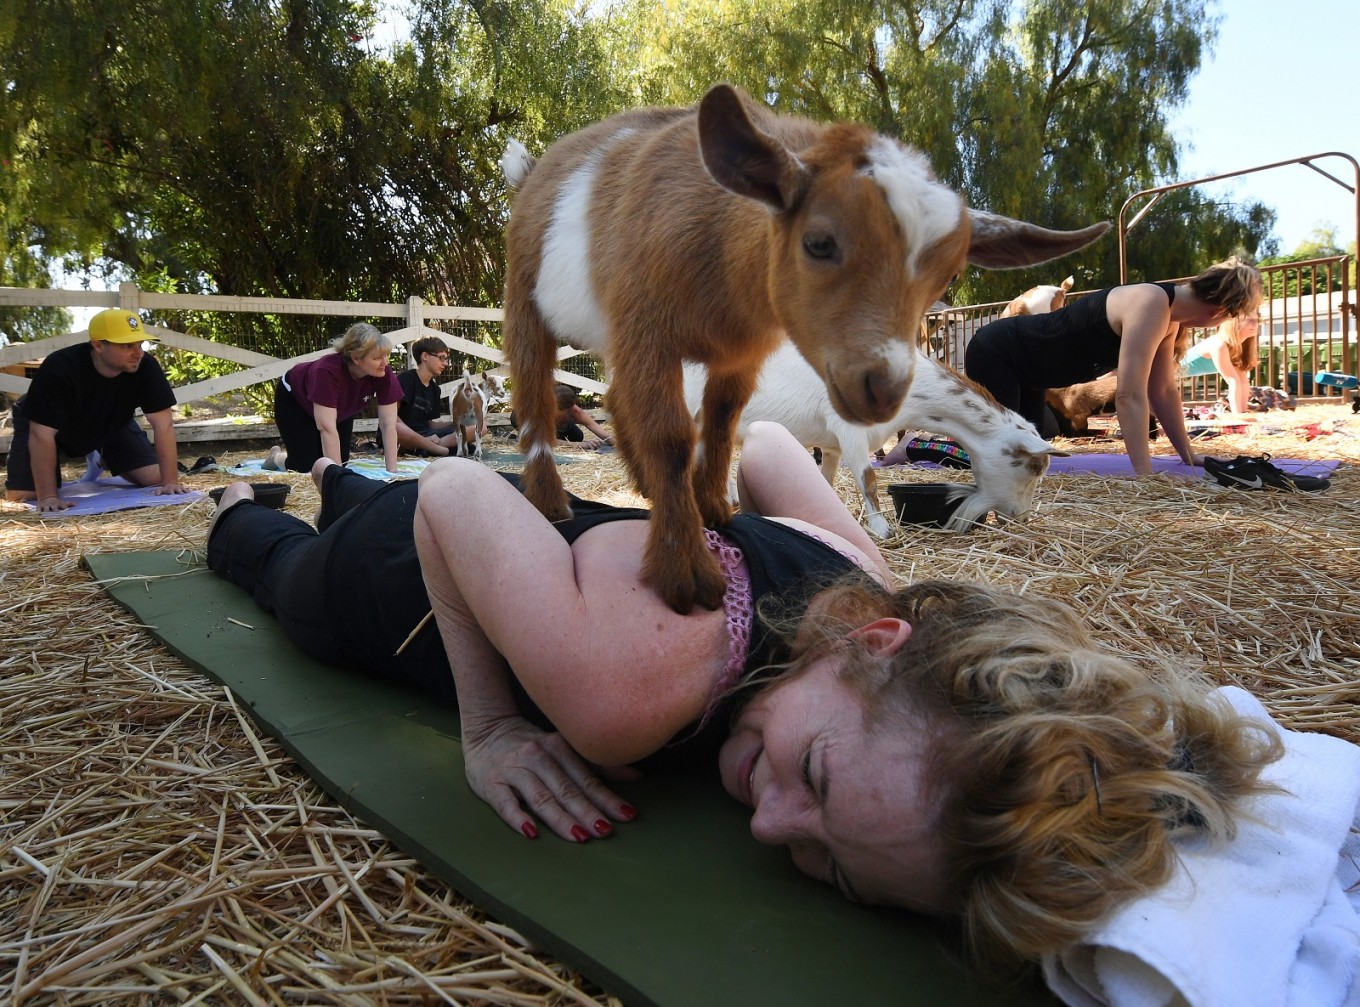 Yoga with goats craze: 4 other animals to namaste with, Health